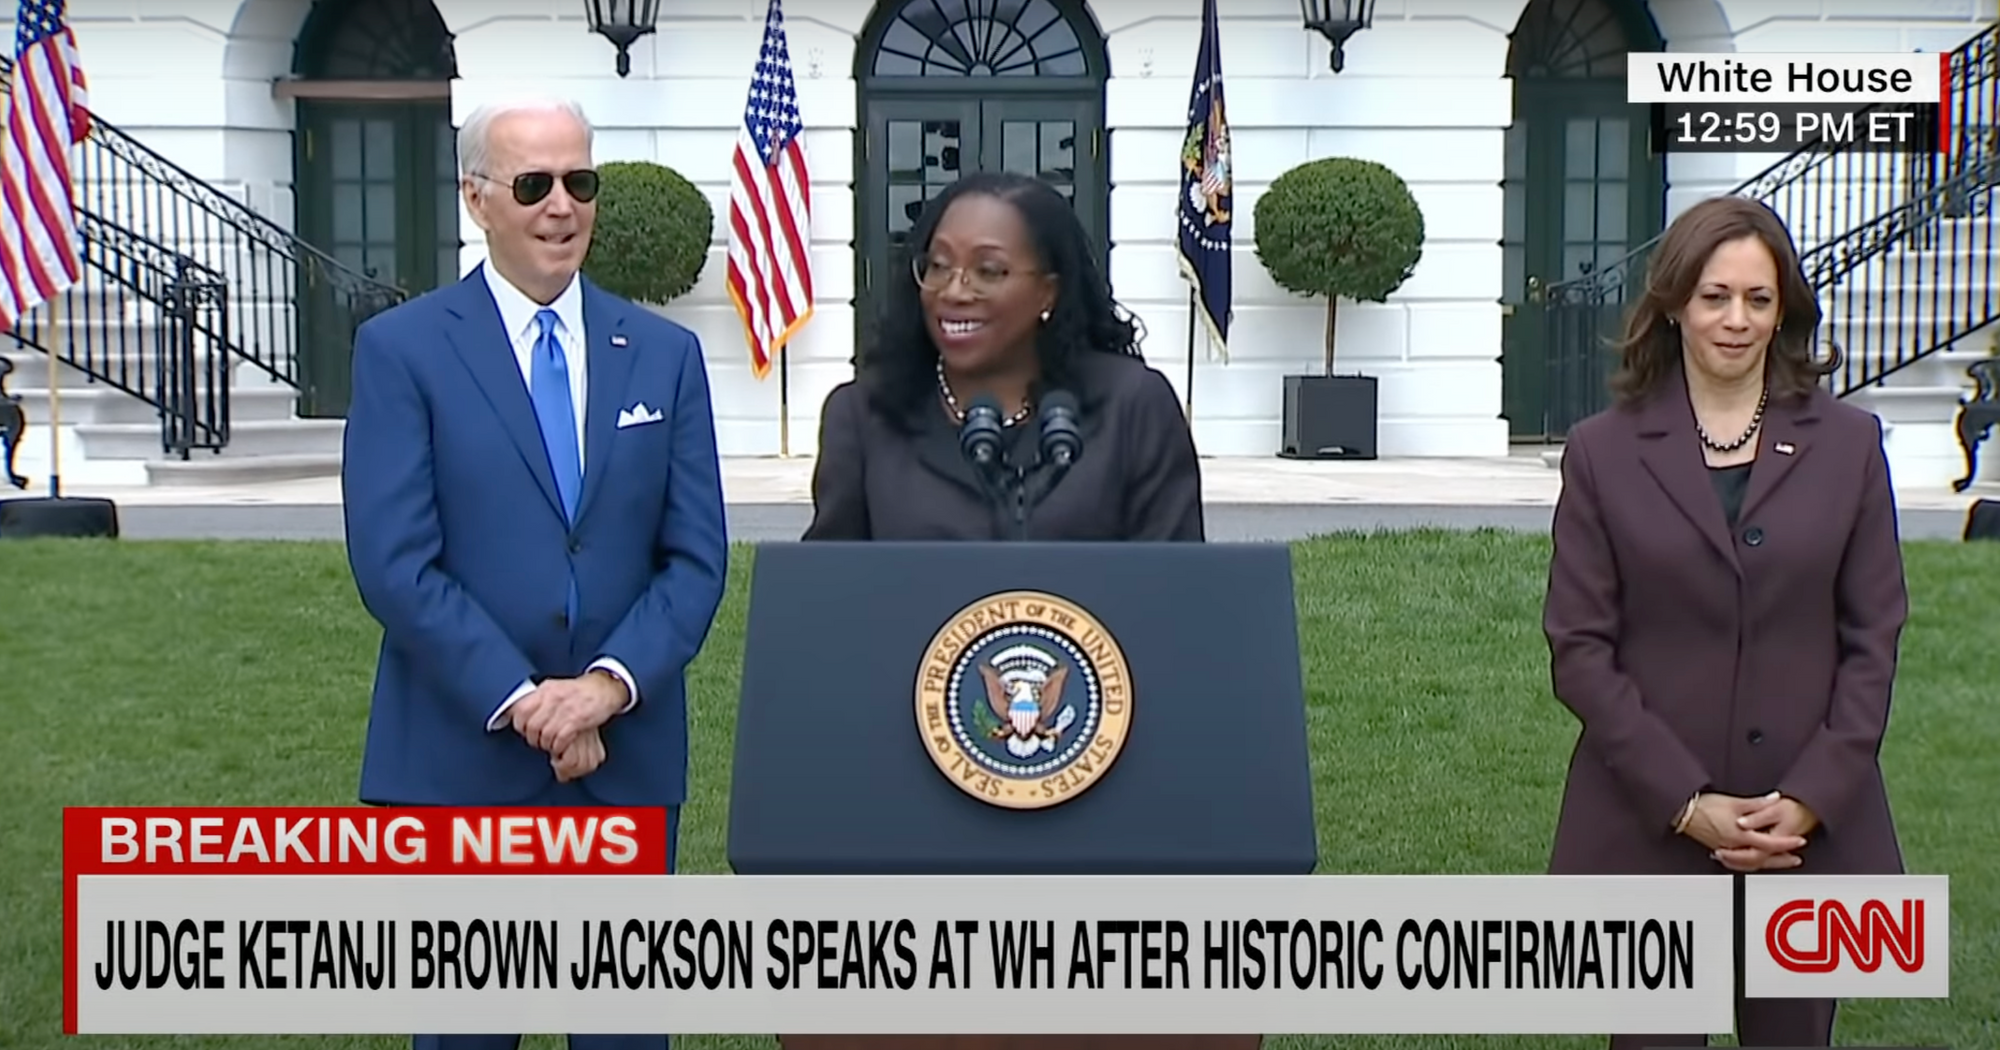 Ketanji Brown Jackson speaks at the White House after being confirmed. Photo: CNN screenshot